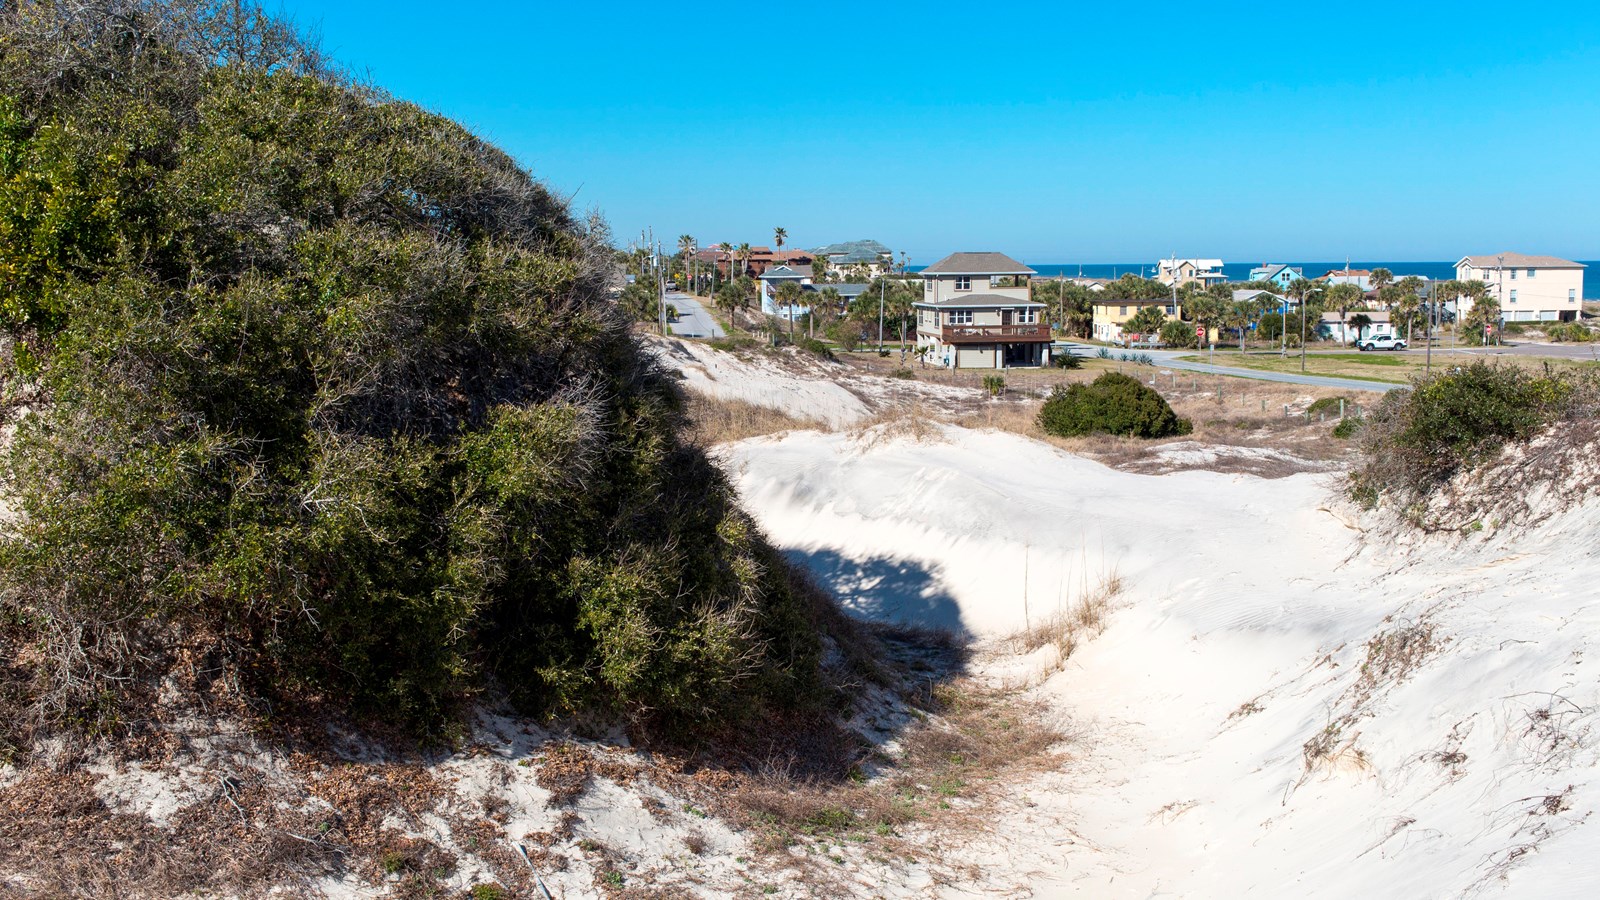 a large dune over looks beach house and the ocean